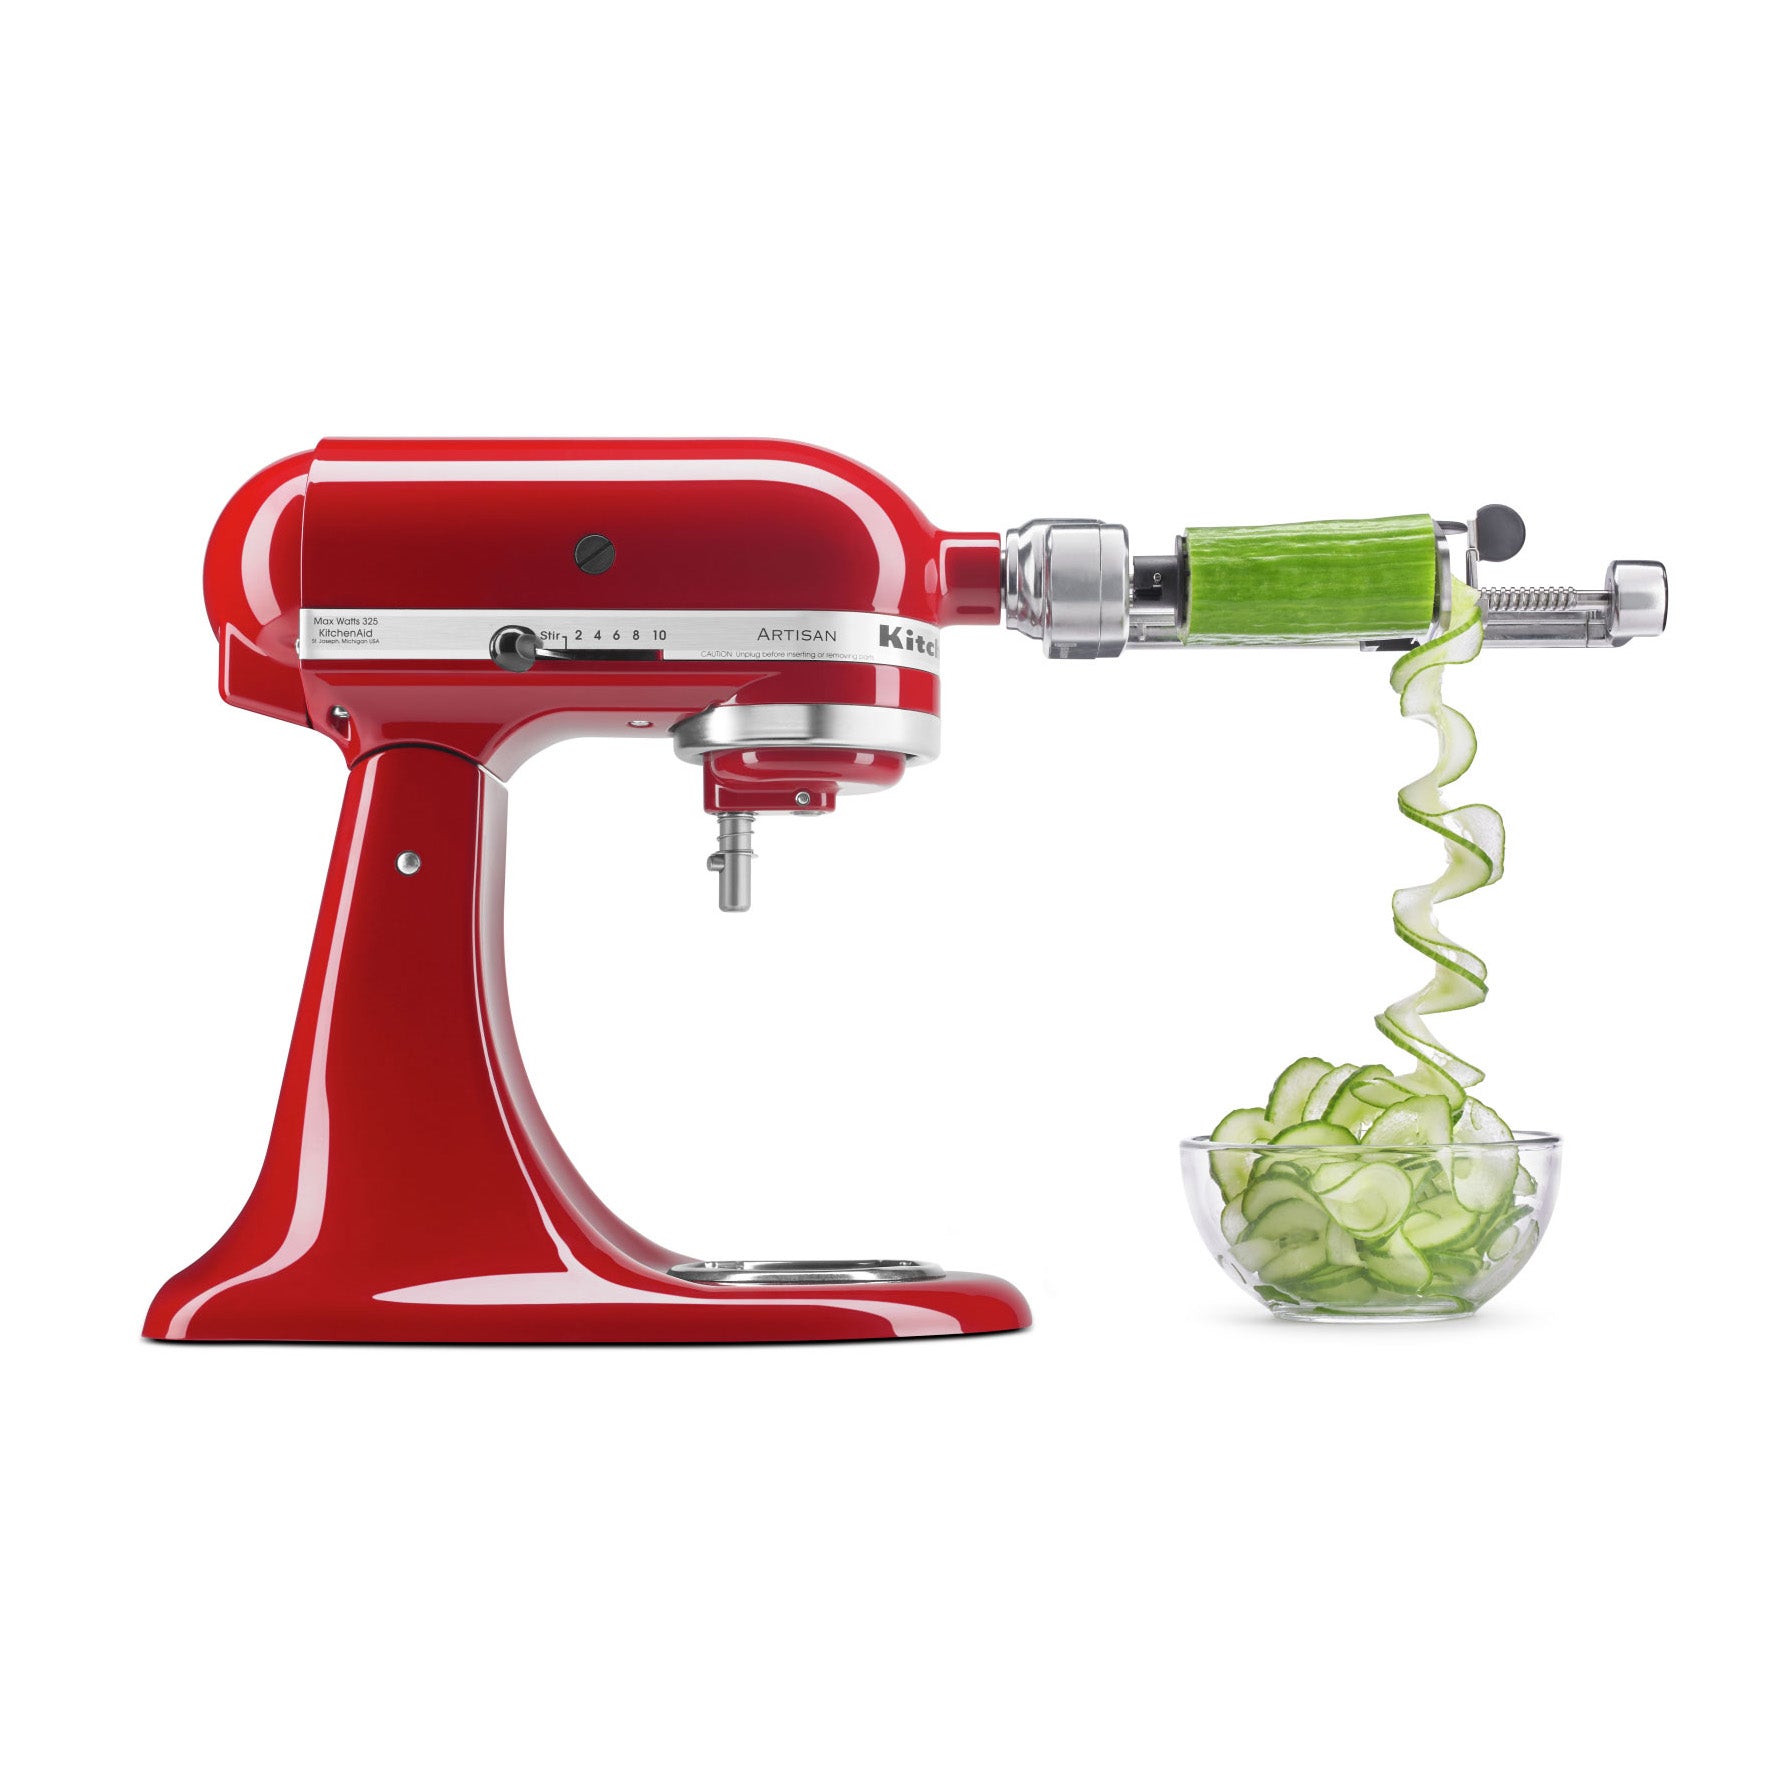 KITCHENAID 7 Blade Spiralizer Plus with Peel, Core and Slice Attachment